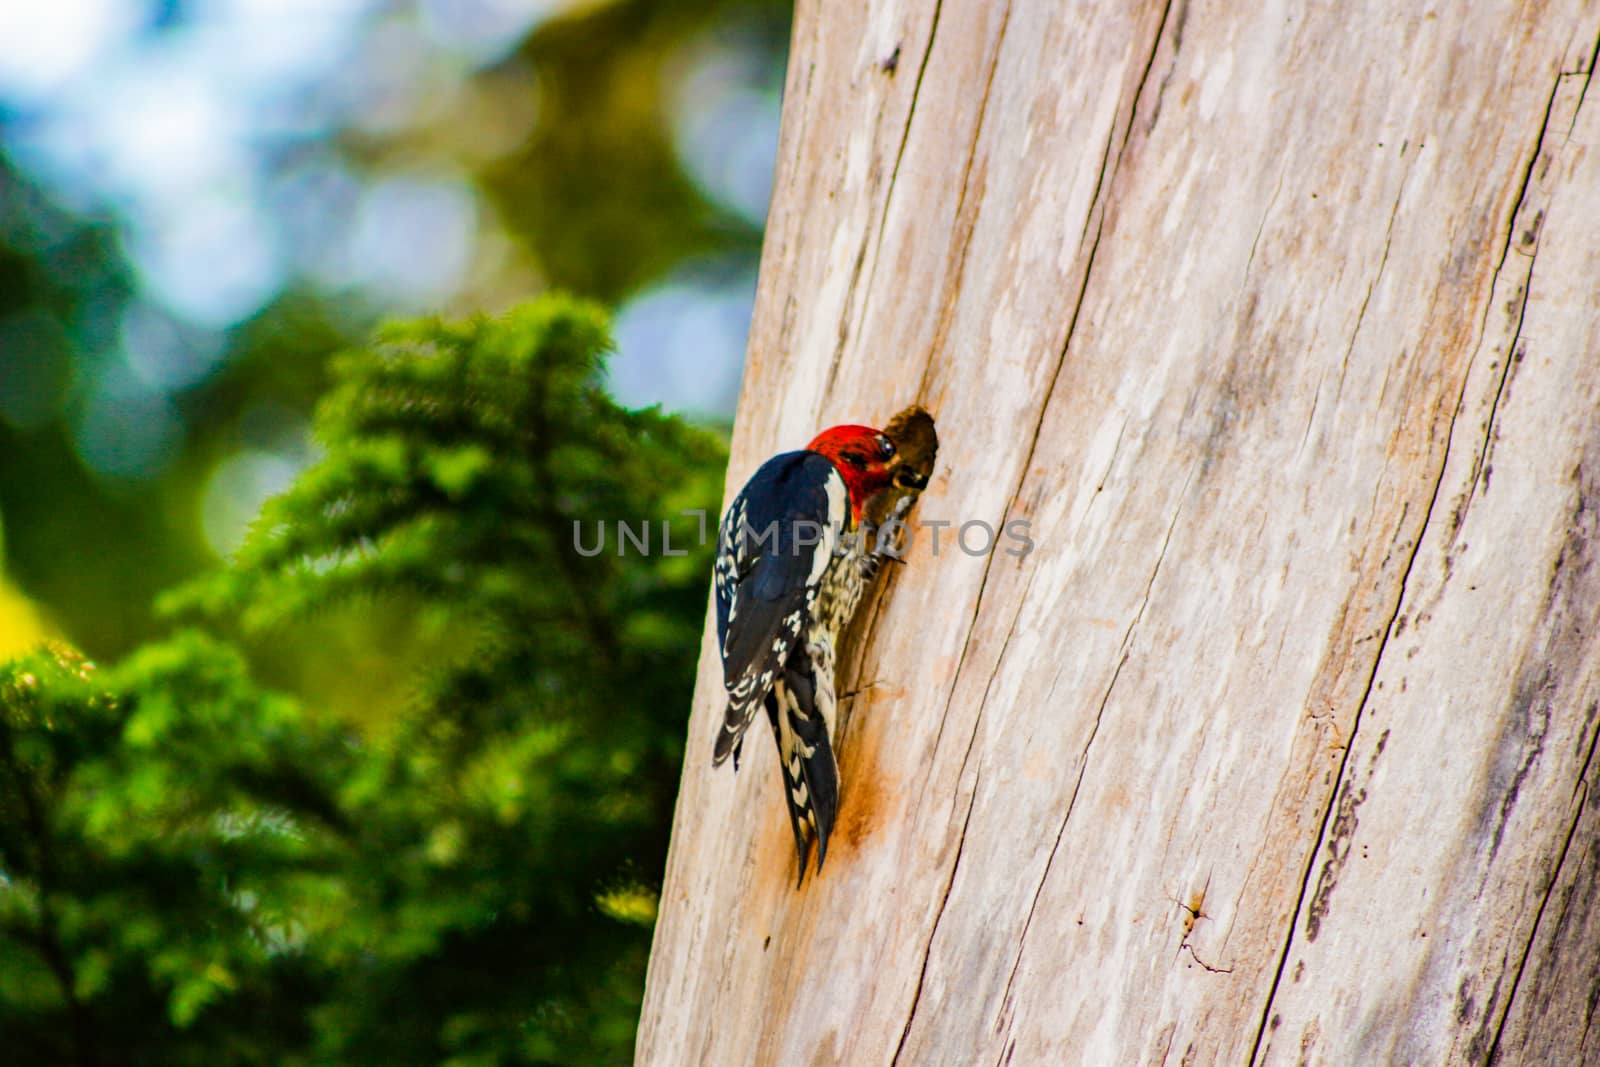 Yellow-Bellied Sapsucker (Sphyrapicus varius). A female Yellow-bellied Sapsucker scours the trunk of a birch tree in search of insects trapped in pools of sap